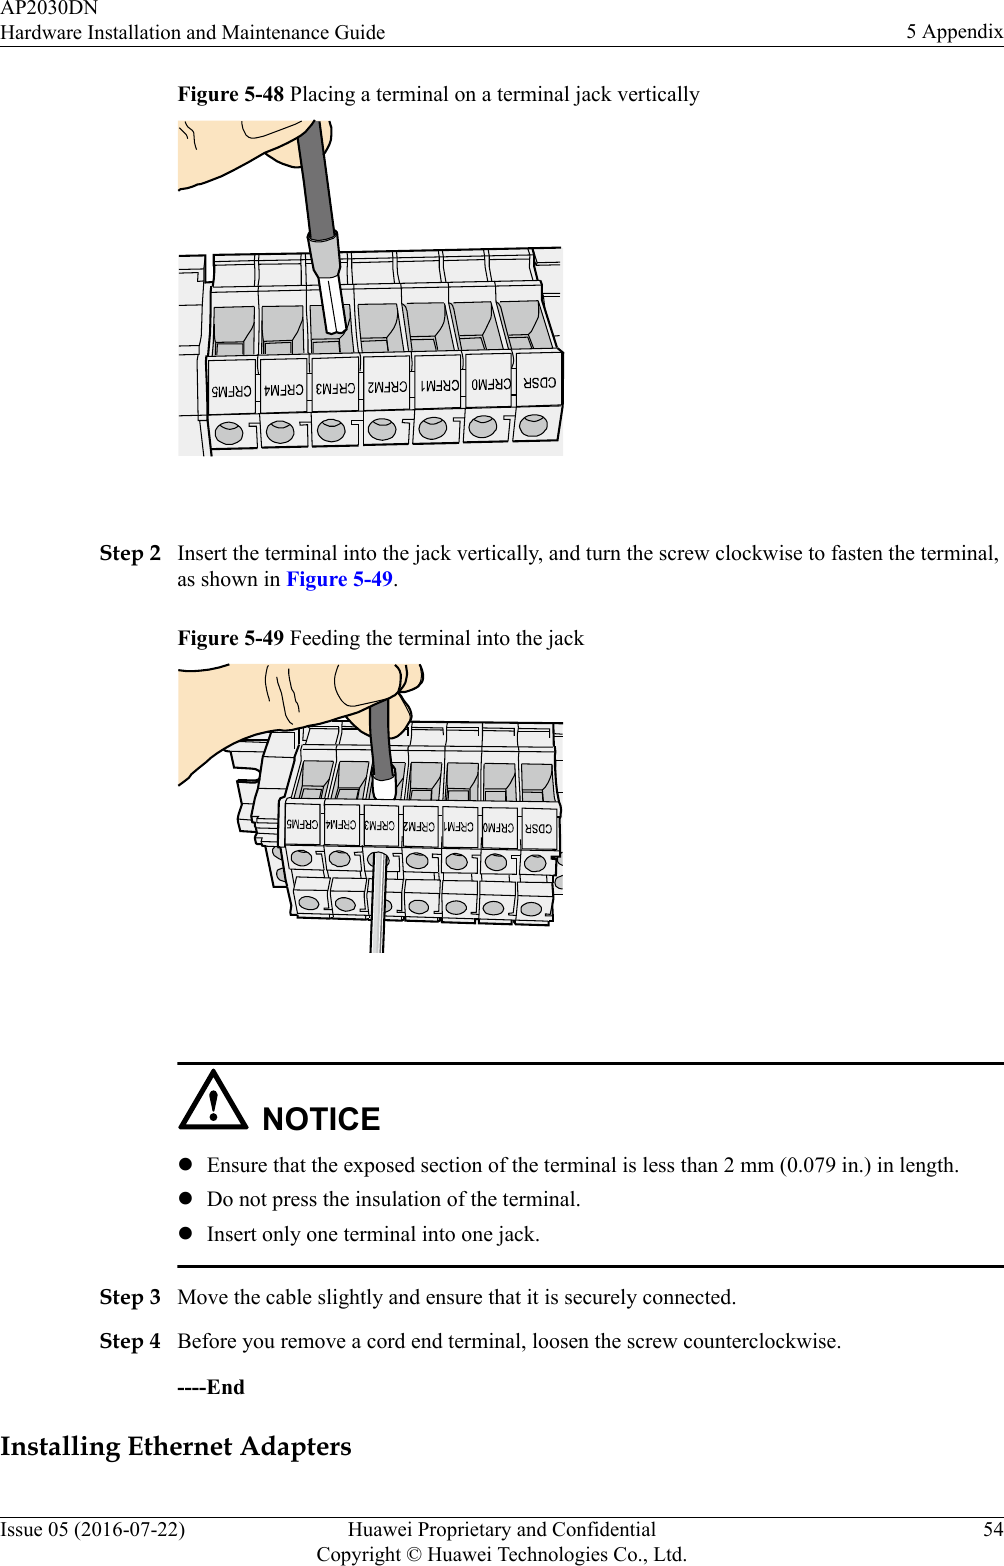 Figure 5-48 Placing a terminal on a terminal jack vertically Step 2 Insert the terminal into the jack vertically, and turn the screw clockwise to fasten the terminal,as shown in Figure 5-49.Figure 5-49 Feeding the terminal into the jack NOTICElEnsure that the exposed section of the terminal is less than 2 mm (0.079 in.) in length.lDo not press the insulation of the terminal.lInsert only one terminal into one jack.Step 3 Move the cable slightly and ensure that it is securely connected.Step 4 Before you remove a cord end terminal, loosen the screw counterclockwise.----EndInstalling Ethernet AdaptersAP2030DNHardware Installation and Maintenance Guide 5 AppendixIssue 05 (2016-07-22) Huawei Proprietary and ConfidentialCopyright © Huawei Technologies Co., Ltd.54